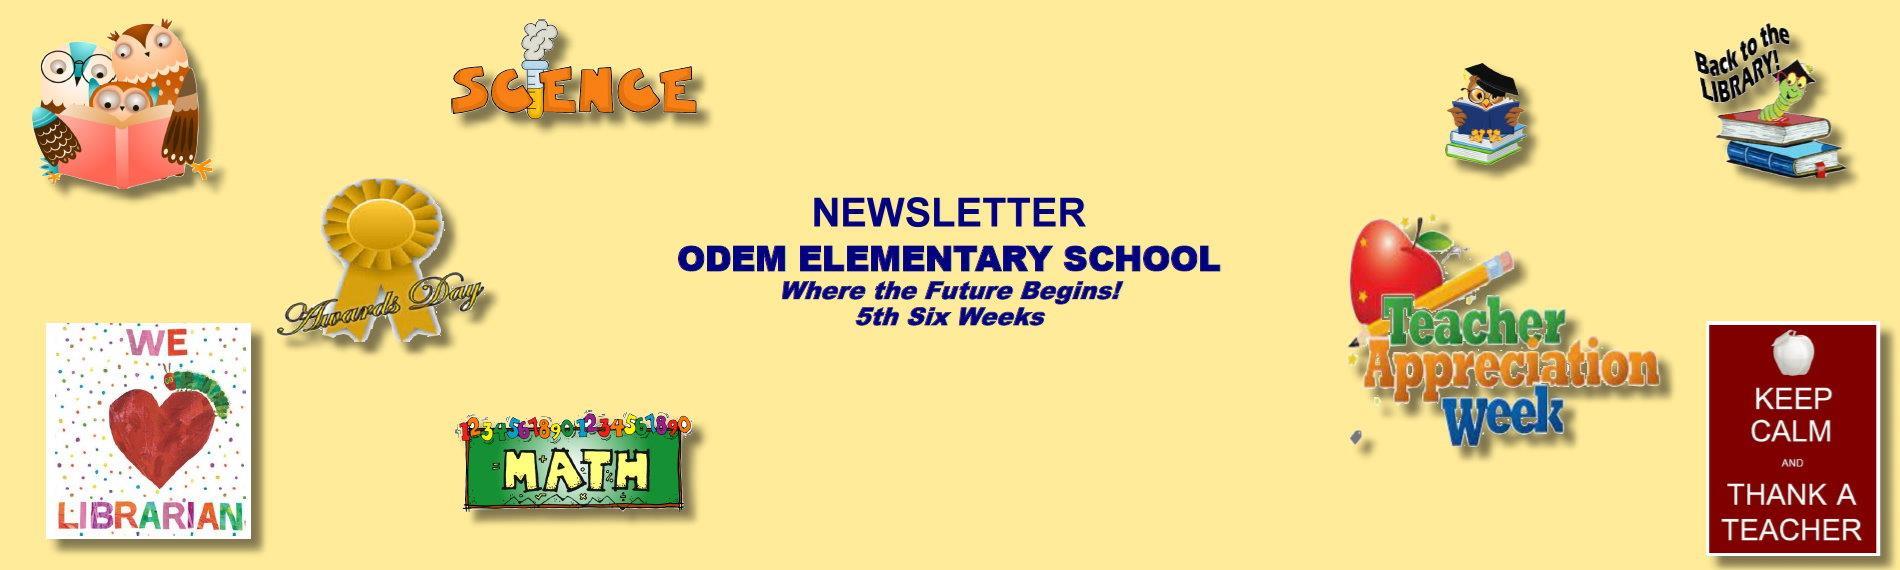 OES Newsletter 